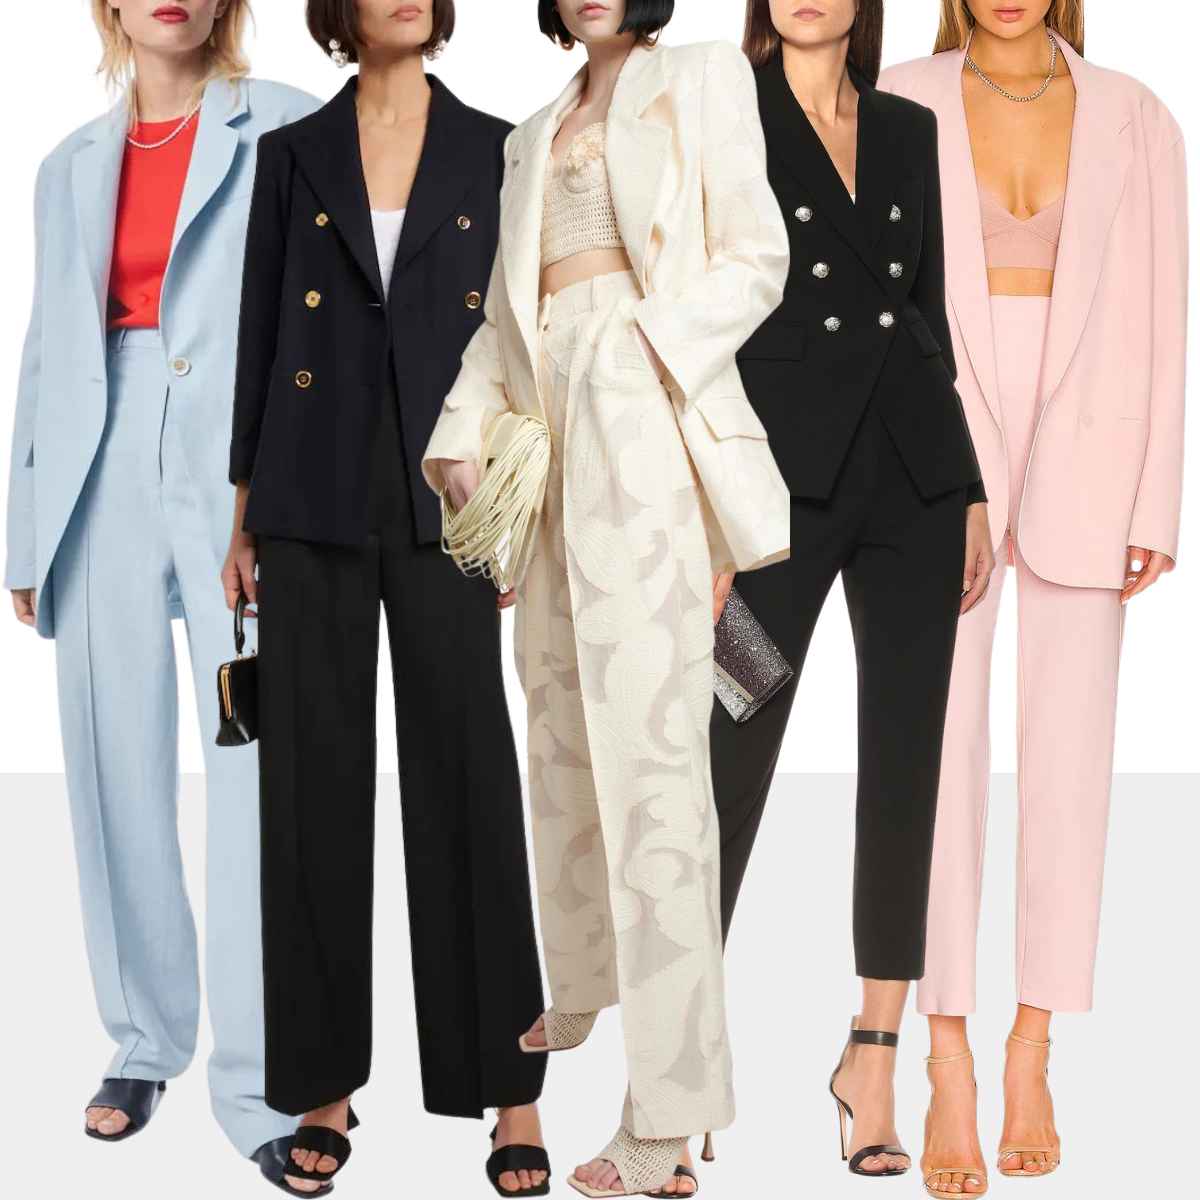 Collage of 5 women wearing various pantsuits with heeled sandals.